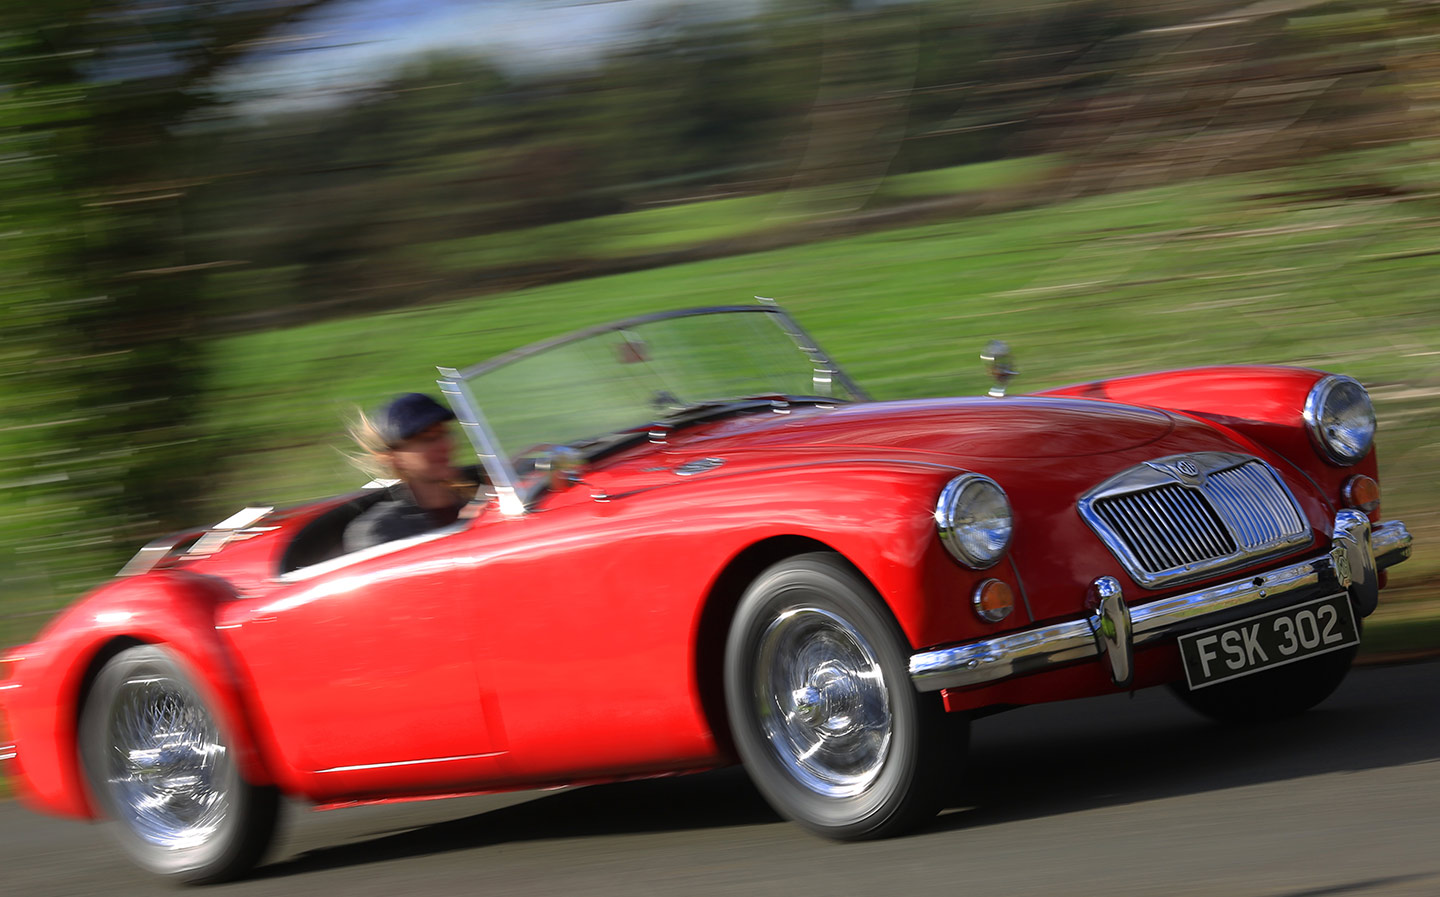 How to Buy a Classic Car: a buying guide by Charlotte Vowden for Driving.co.uk, in association with Footman James